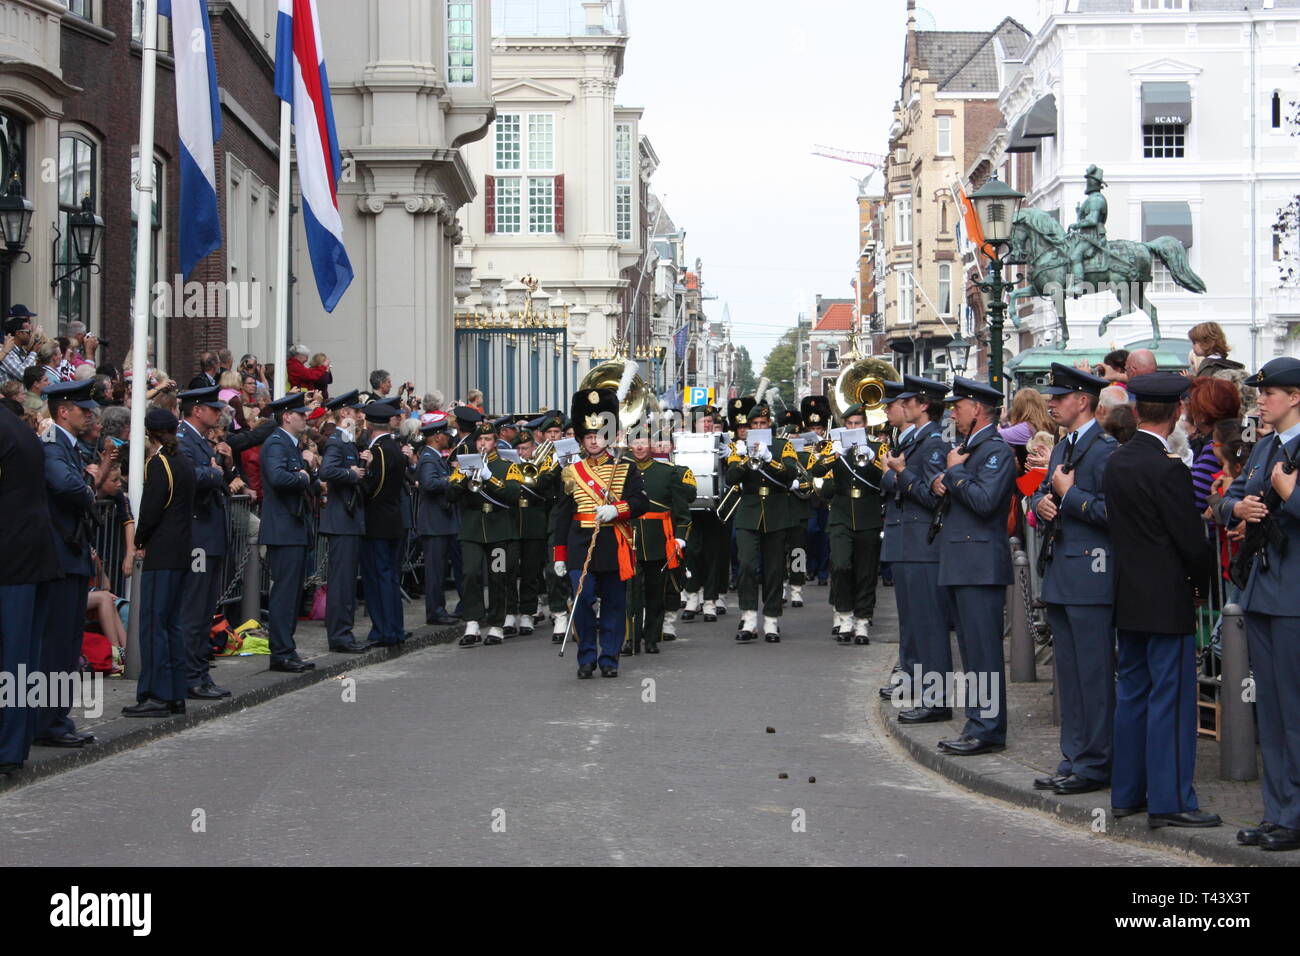 The Central Royal Military Band of the Netherlands Army was marching during the Prinsjesdag Procession in The Hague, South Holland, Netherlands. Stock Photo